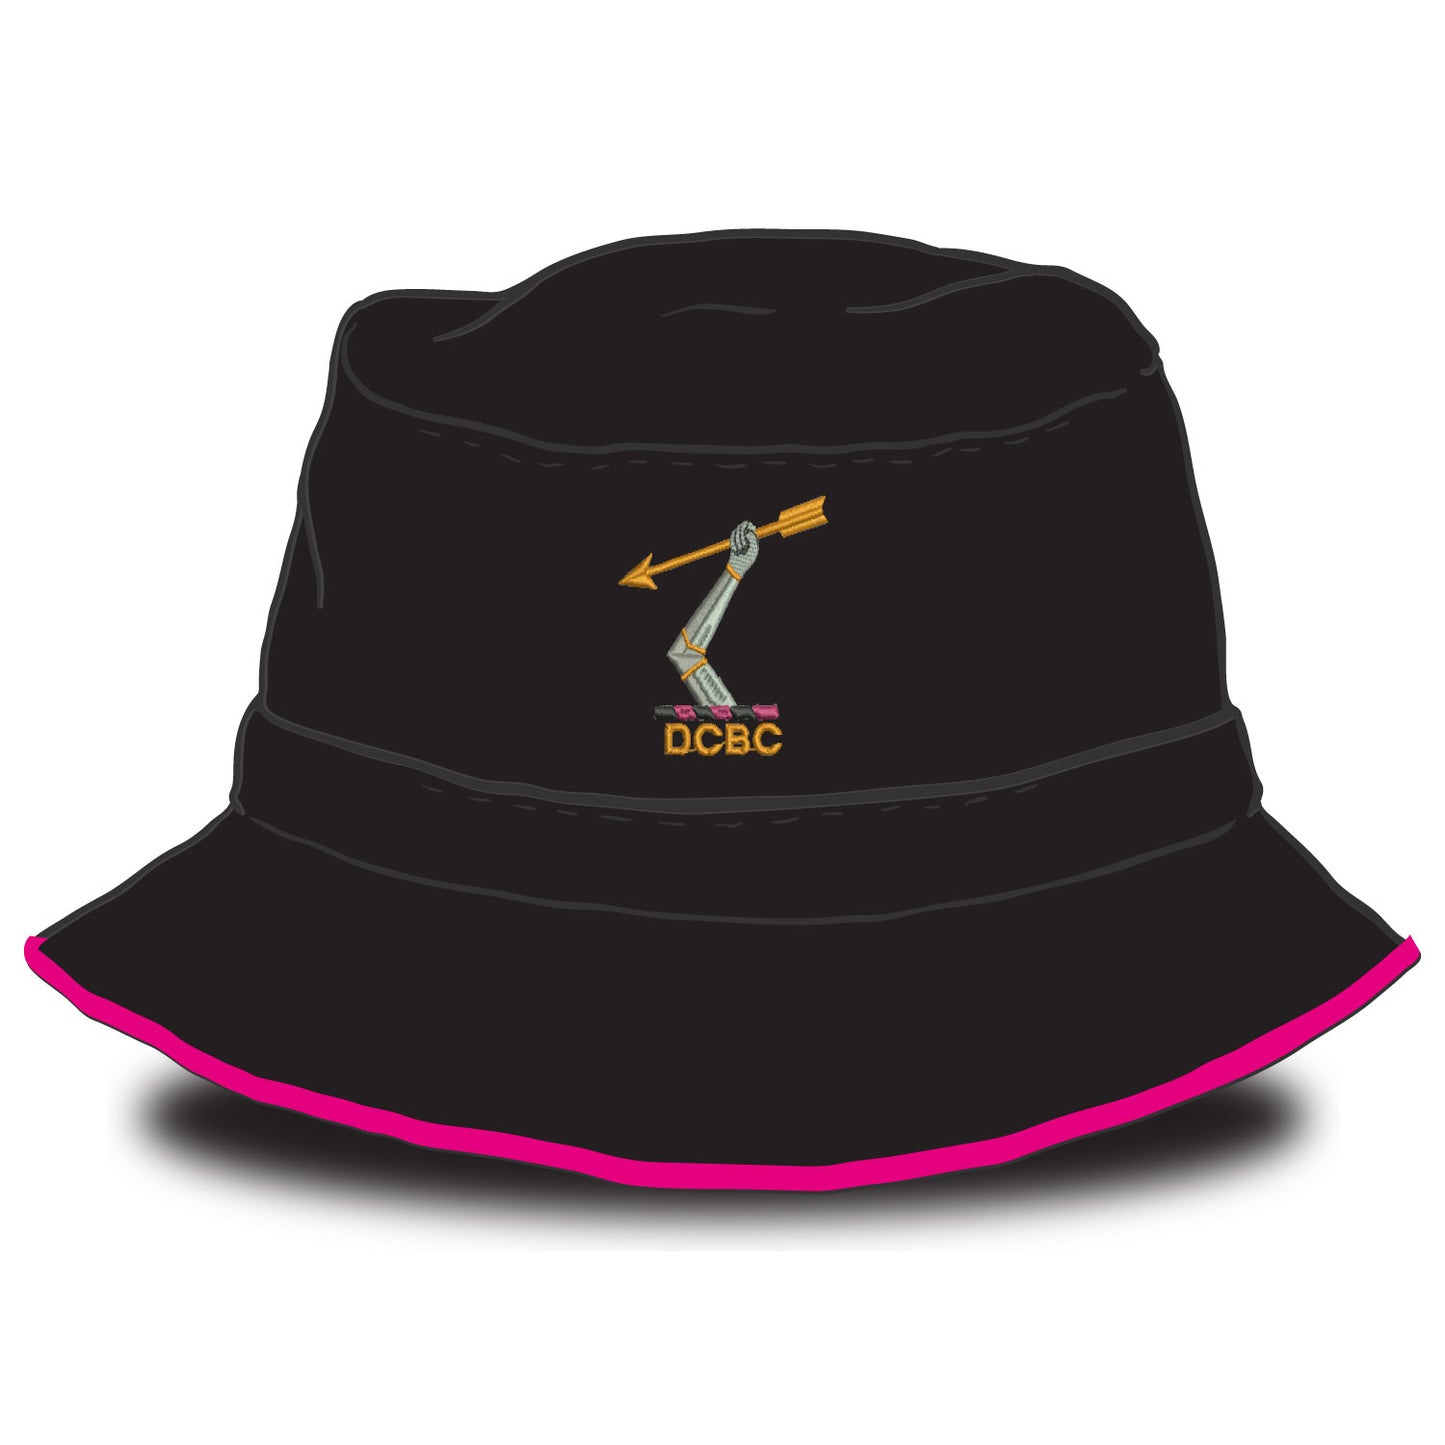 Downing College Bucket Hat